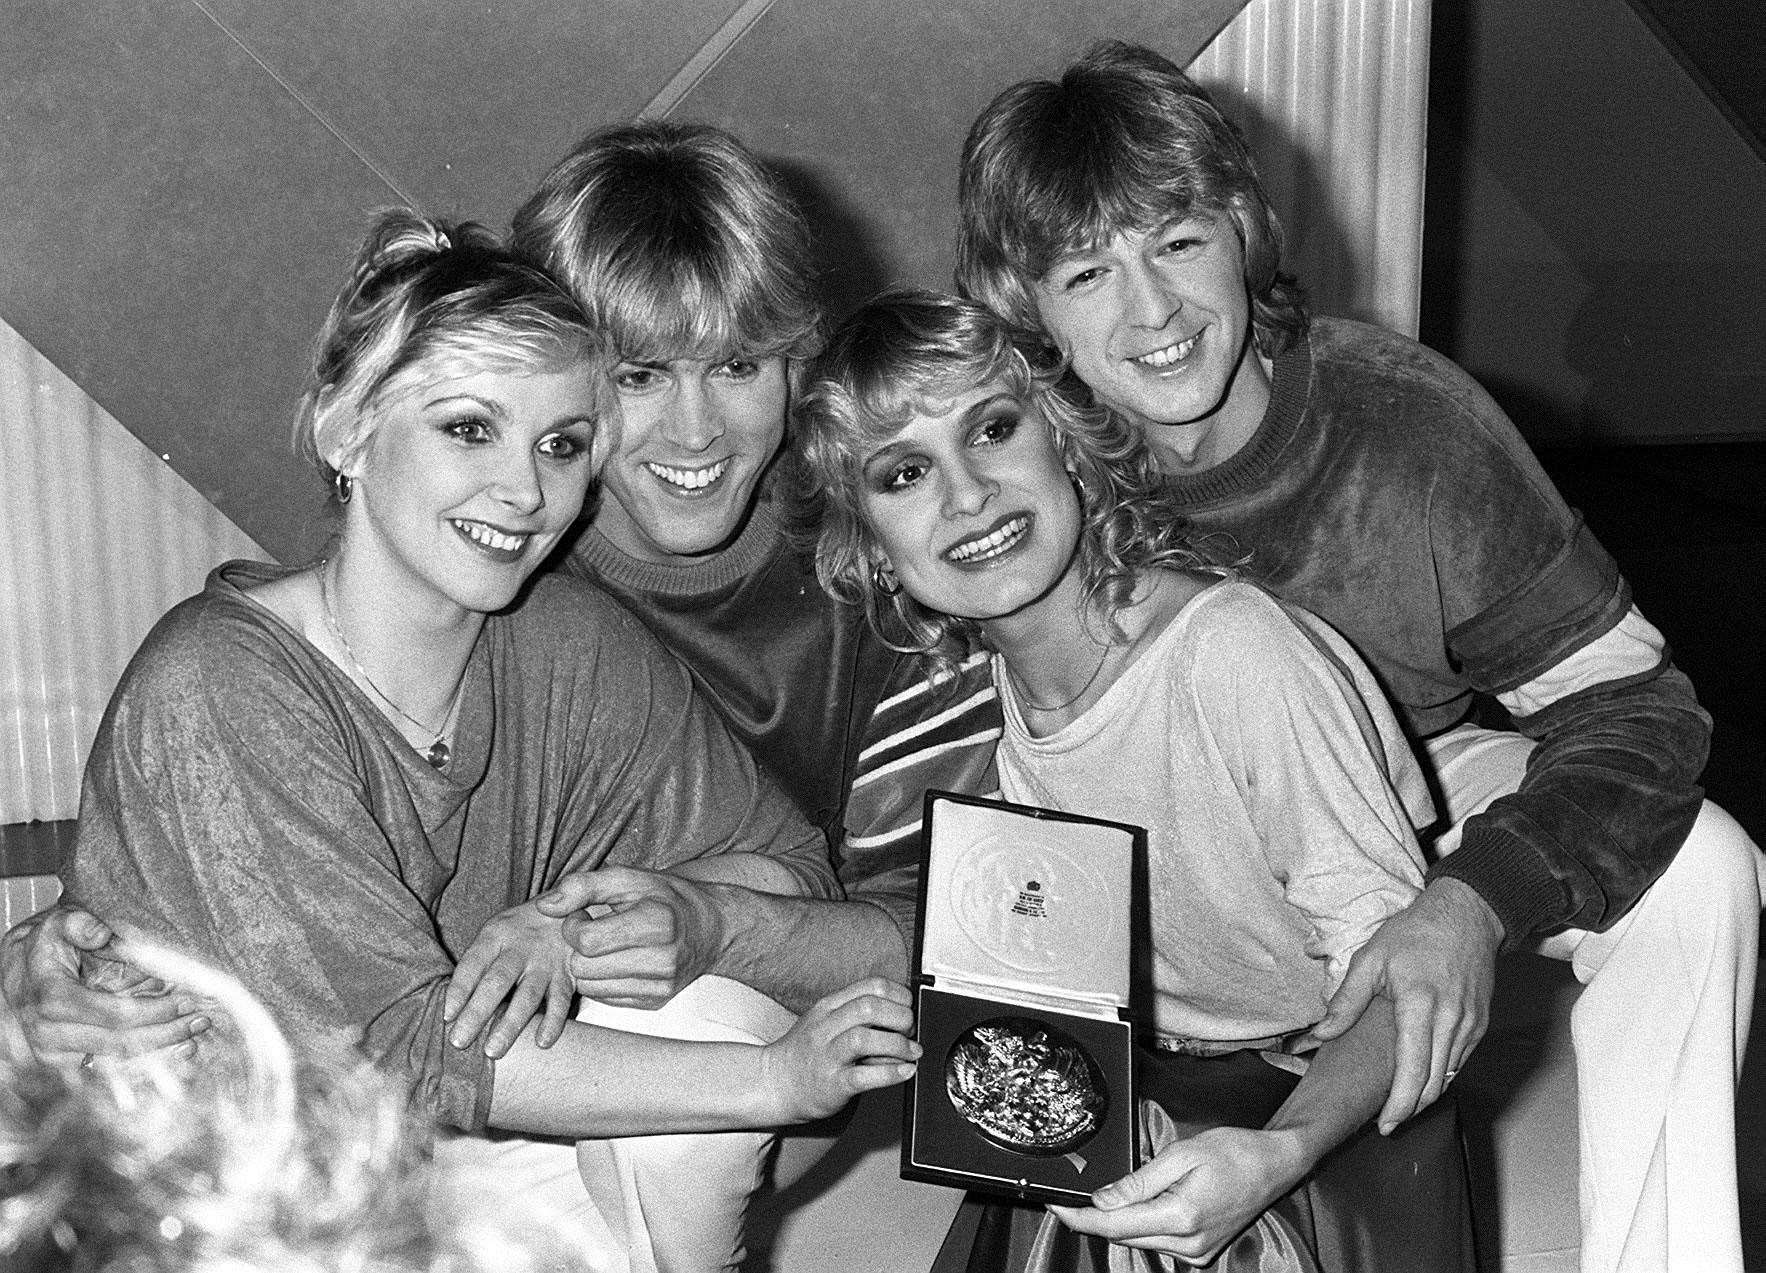 Bucks Fizz following their Eurovision Song Contest victory in 1981 - but can they win tonight's vote? Picture: PA